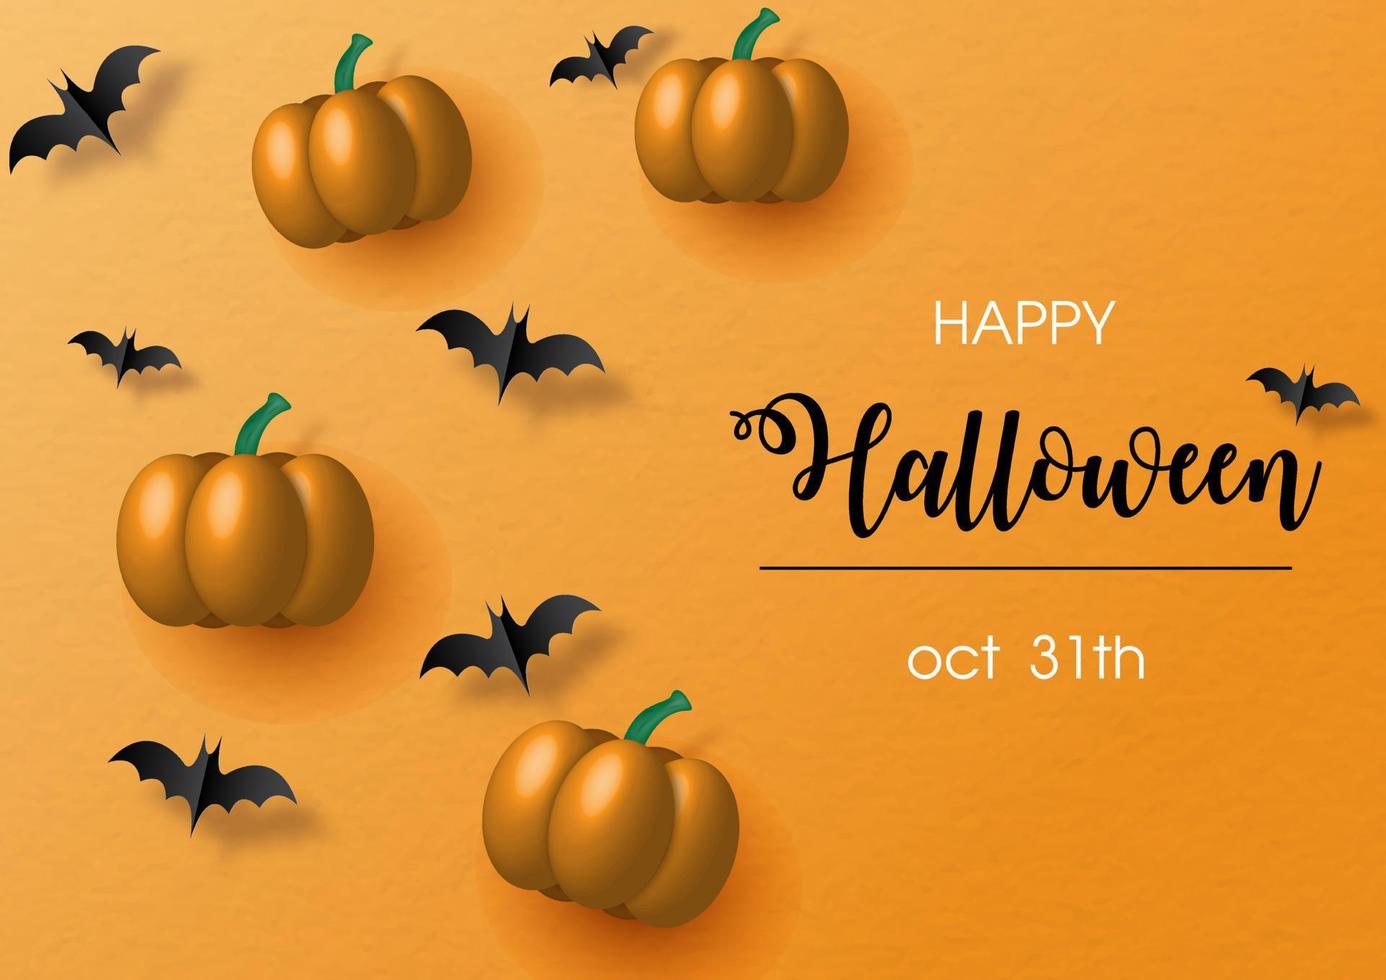 Pumpkins in 3d with bats flying in paper cut style and the day and name of event on orange background. Greeting card and poster of Halloween day in vector design.